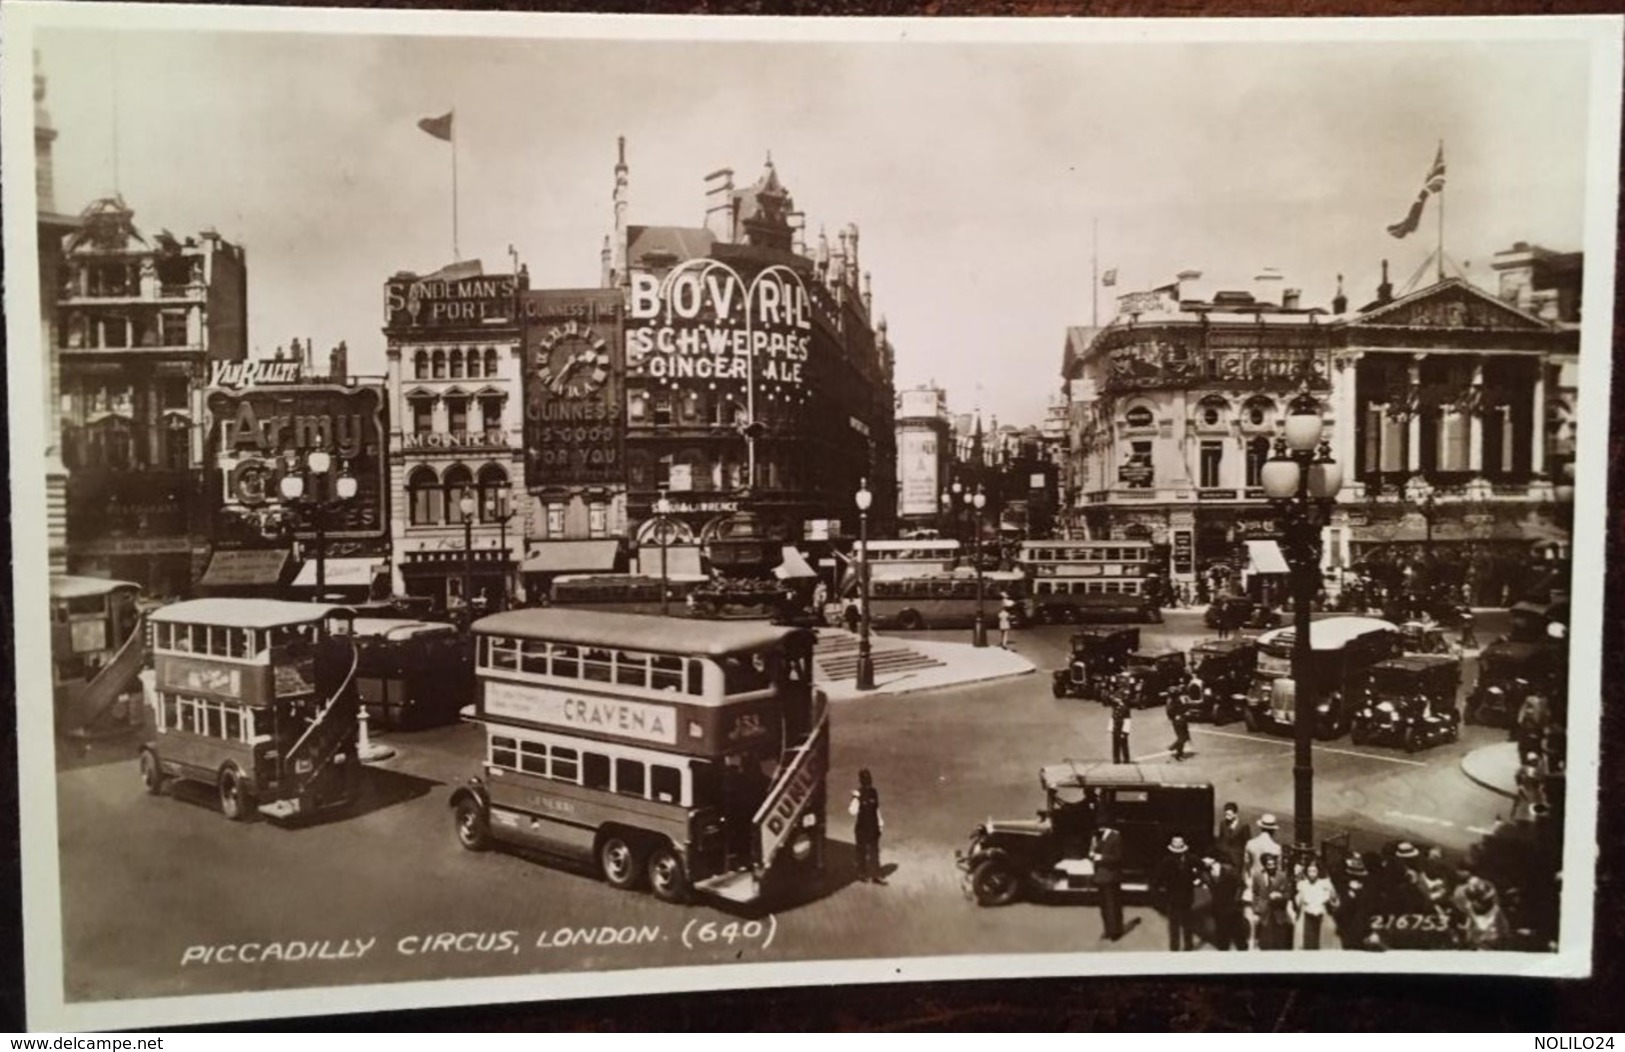 PICCADILLY CIRCUS , LONDON, Animated Postcard, Bus, Vintage Cars, Commercial Signs, éd Valentine & Sons, Non écrite - Piccadilly Circus